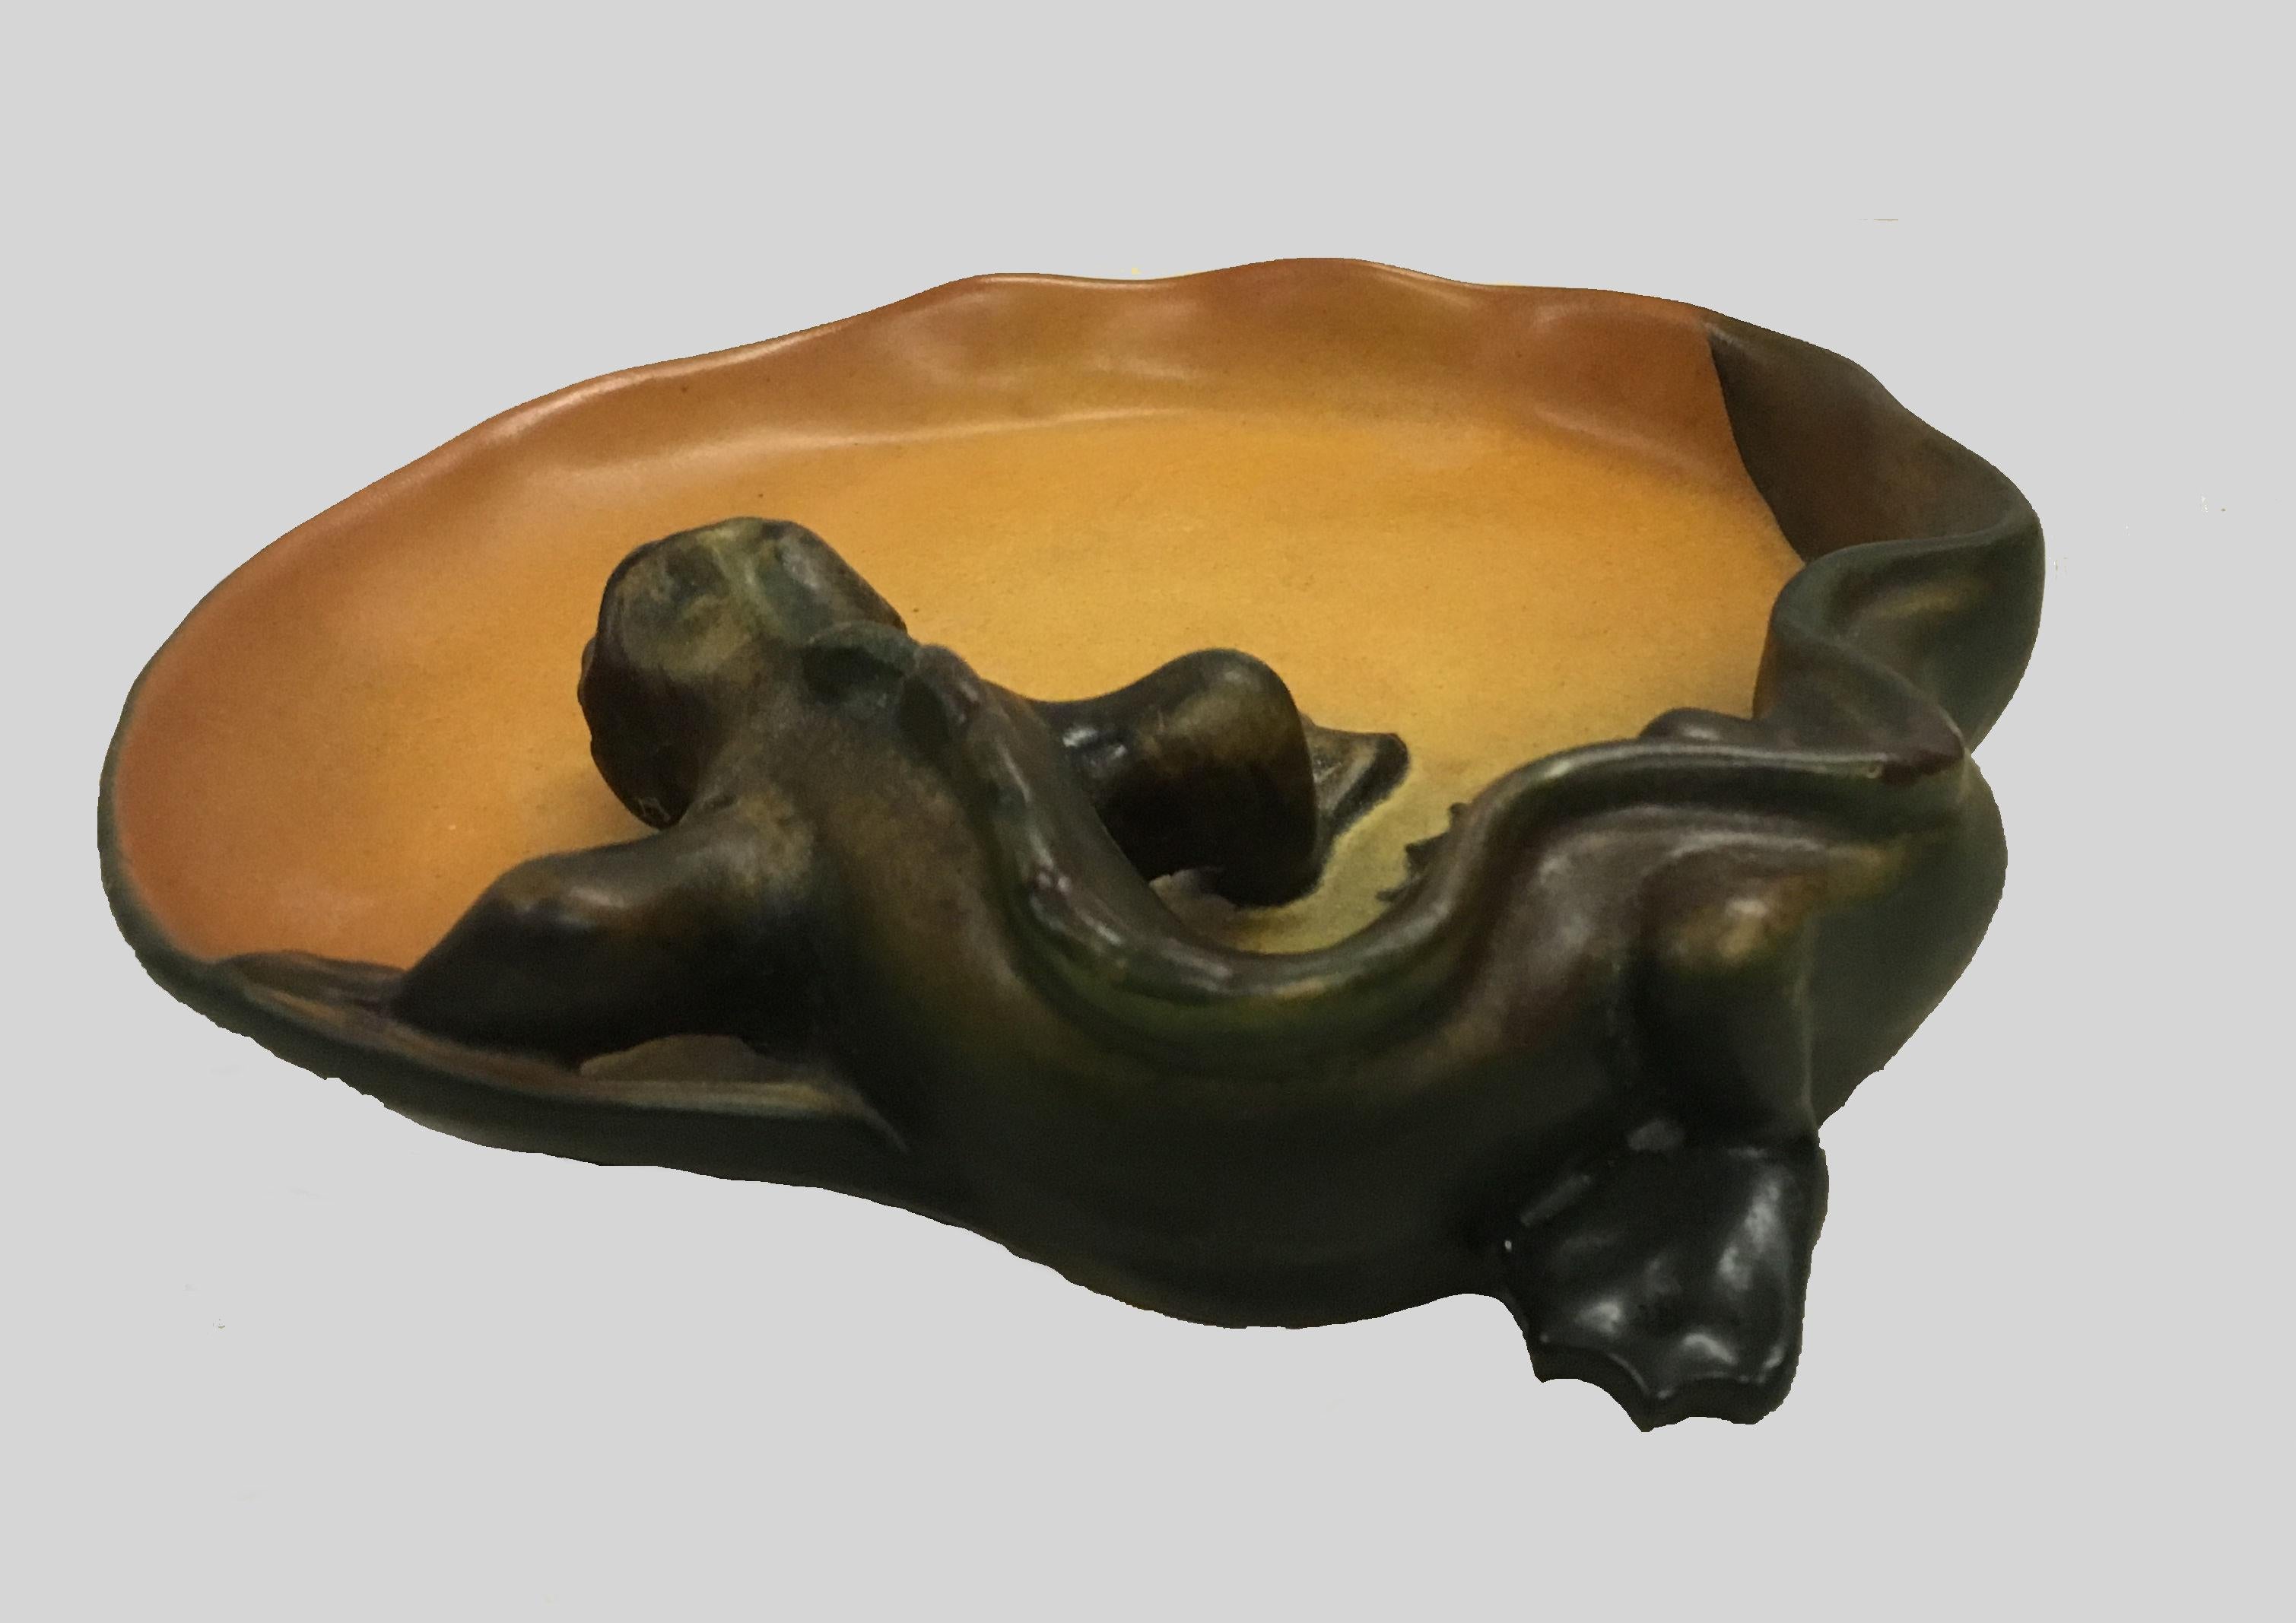 20th Century 1900's Hand-Crafted Danish Art Nouveau Lizard Ash Tray / Bowl by P. Ibsens Enke For Sale